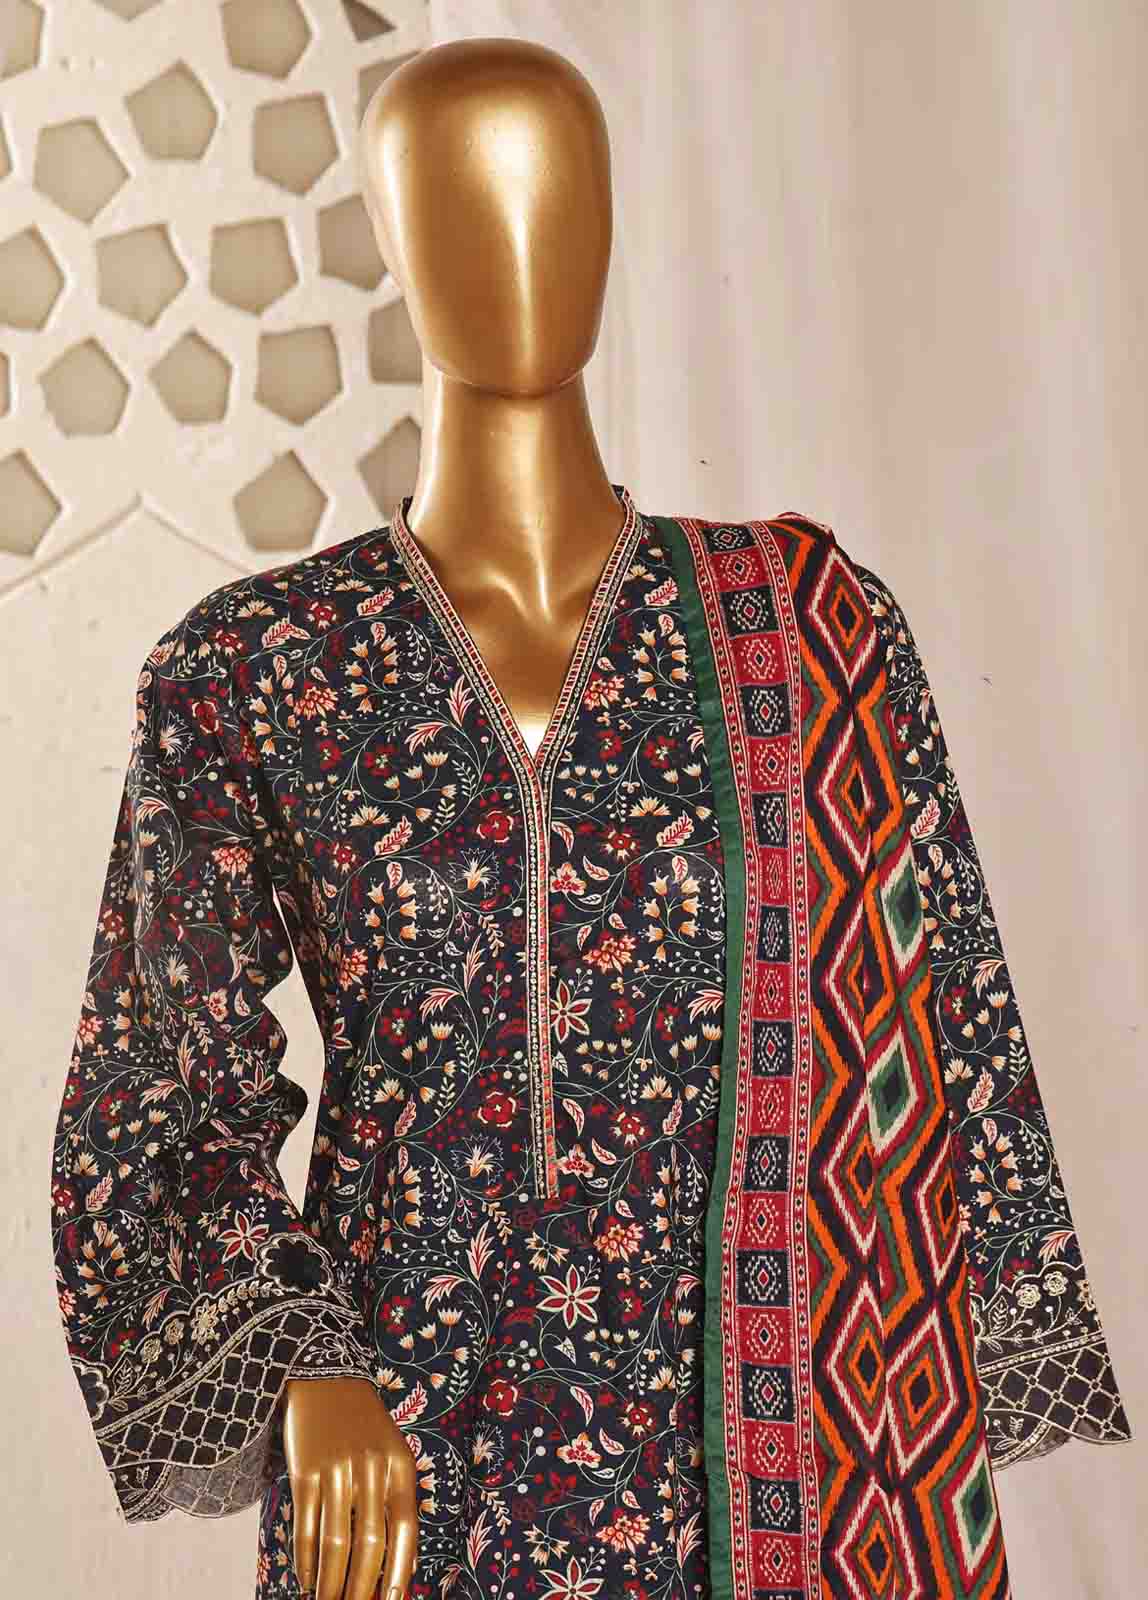 SMLF-FR-632- 3 Piece Embroidered Stitched Suit